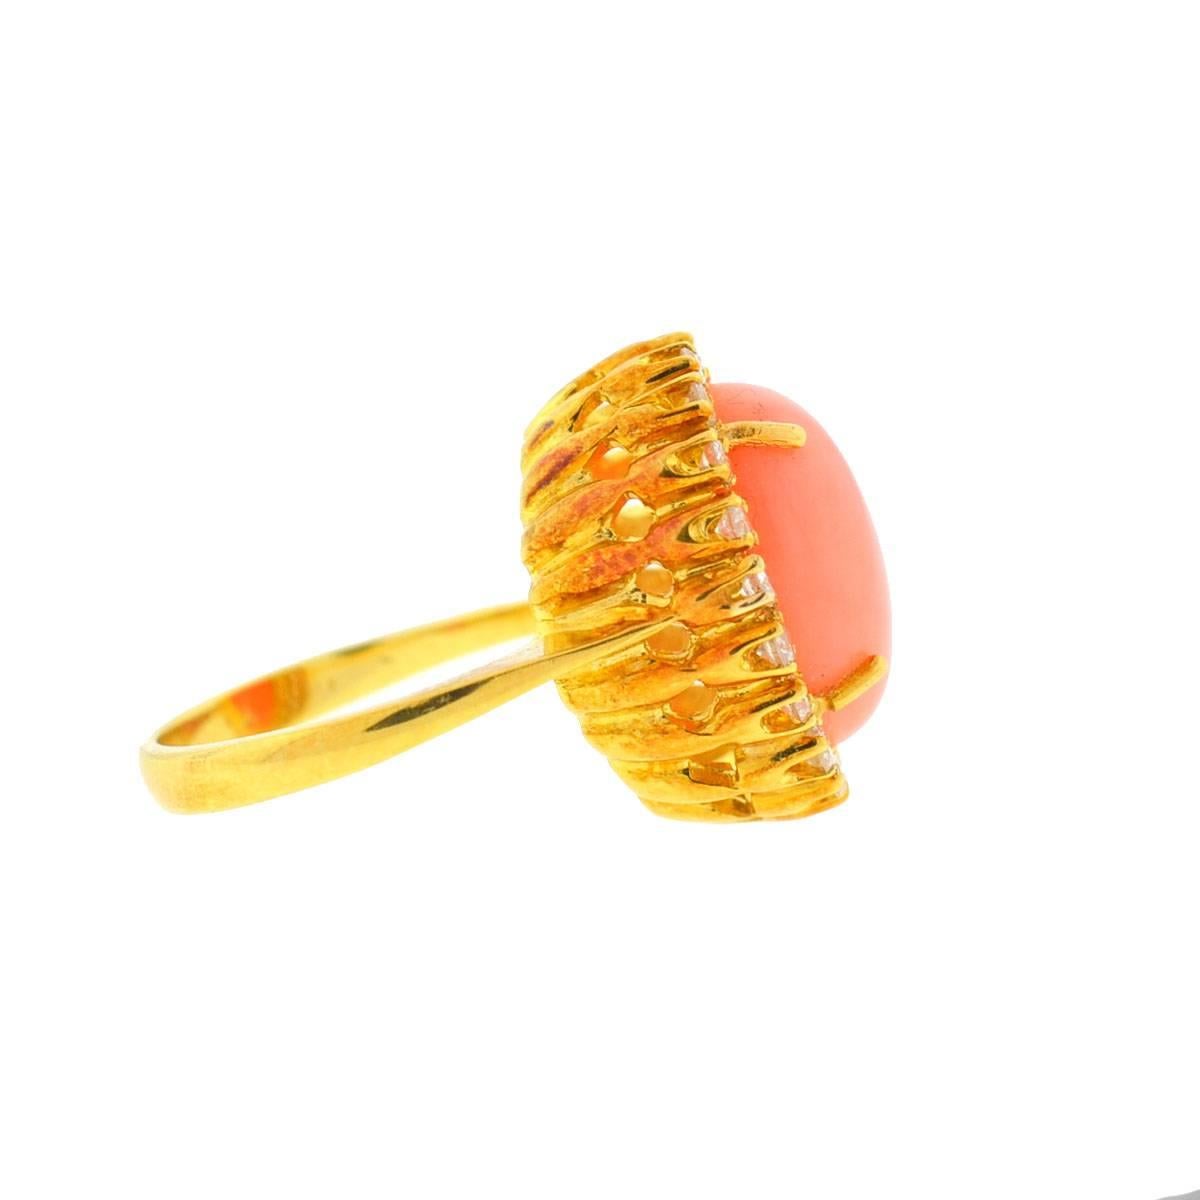 Company-Tiffany & Co.
Style-Oval Coral Stone Ring With Diamonds
Metal-18k Yellow Gold - Tiffany & Co. Stamp has faded over time , we have concluded that based on the craftsmanship and the over all quality of work this is 100% a Tiffany & Co. Ring.